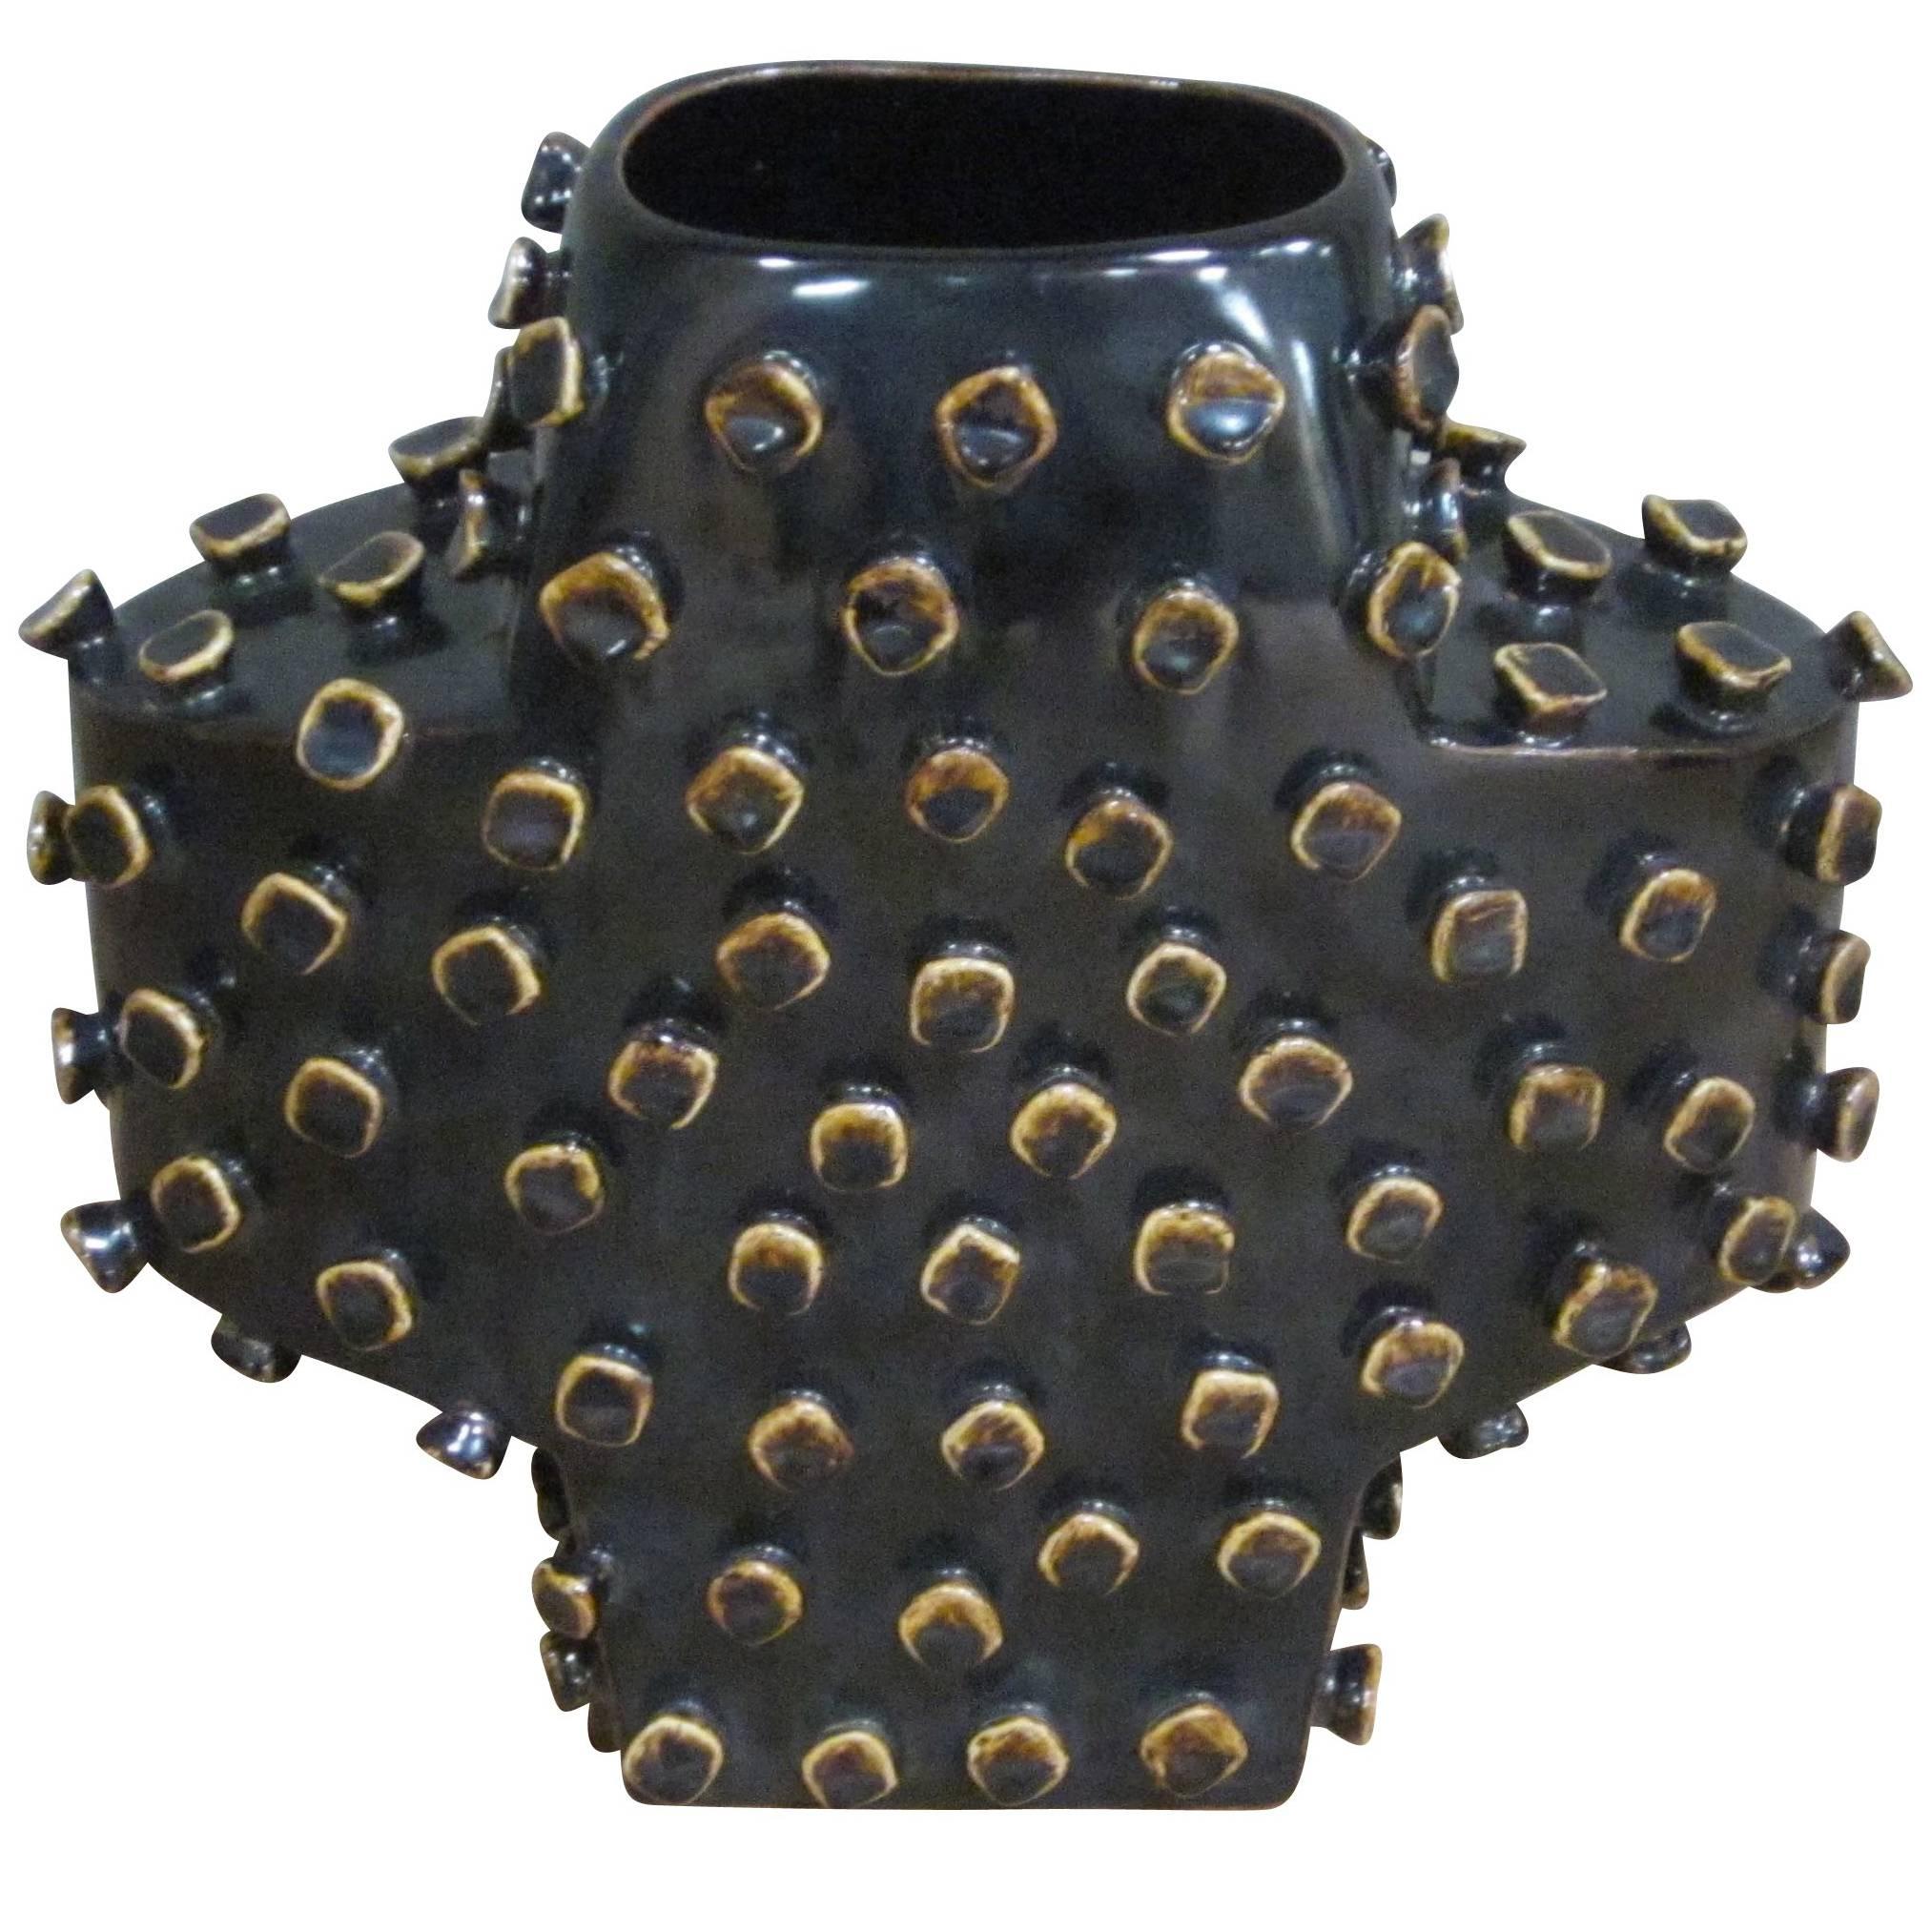 Black and Gold Cross Shaped Vase, France, Contemporary